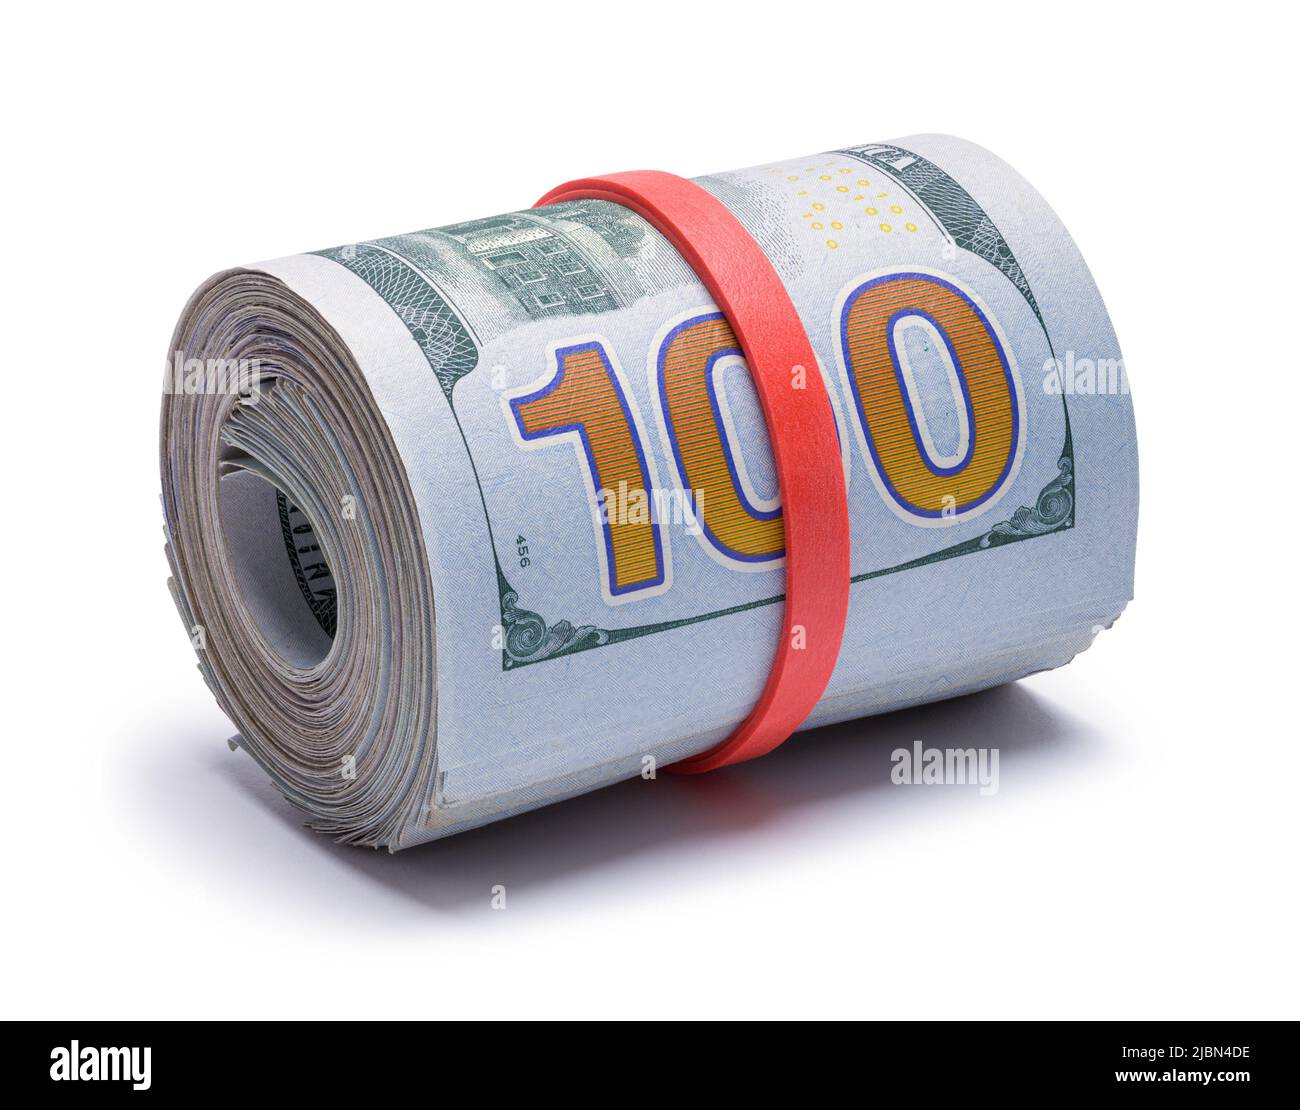 Roll of Hundred Dollars Cut Out on White. Stock Photo